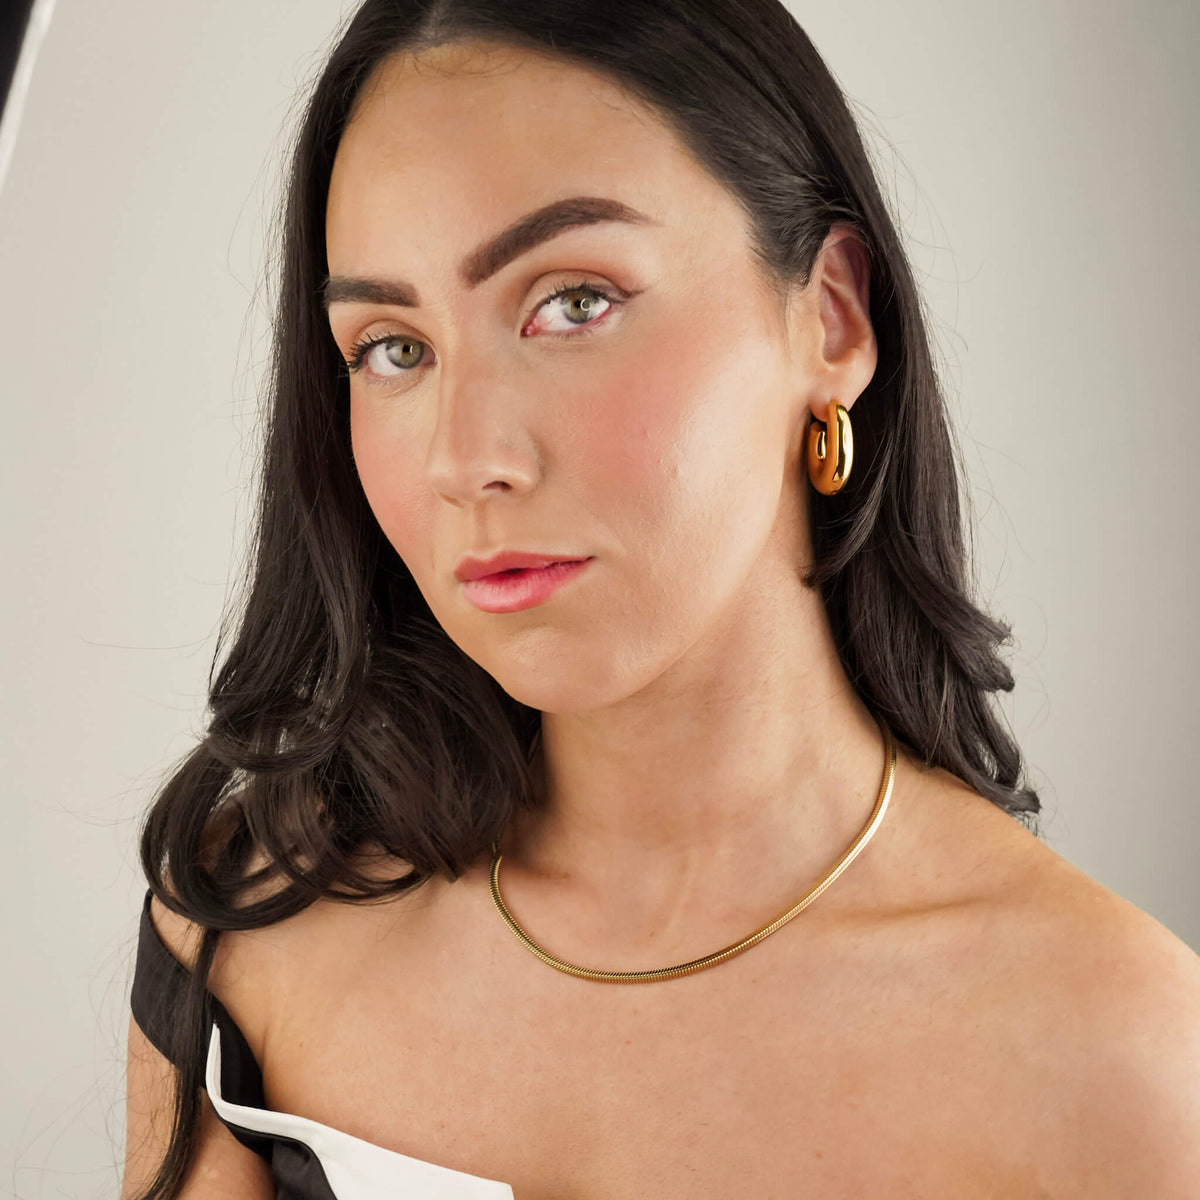 large, chunky hoop earrings that are statement hoops. they have a bubble or balloon like appearance. they are worn by a model who has styled the command hoops with a simple gold chain from Mettle & Bloom.